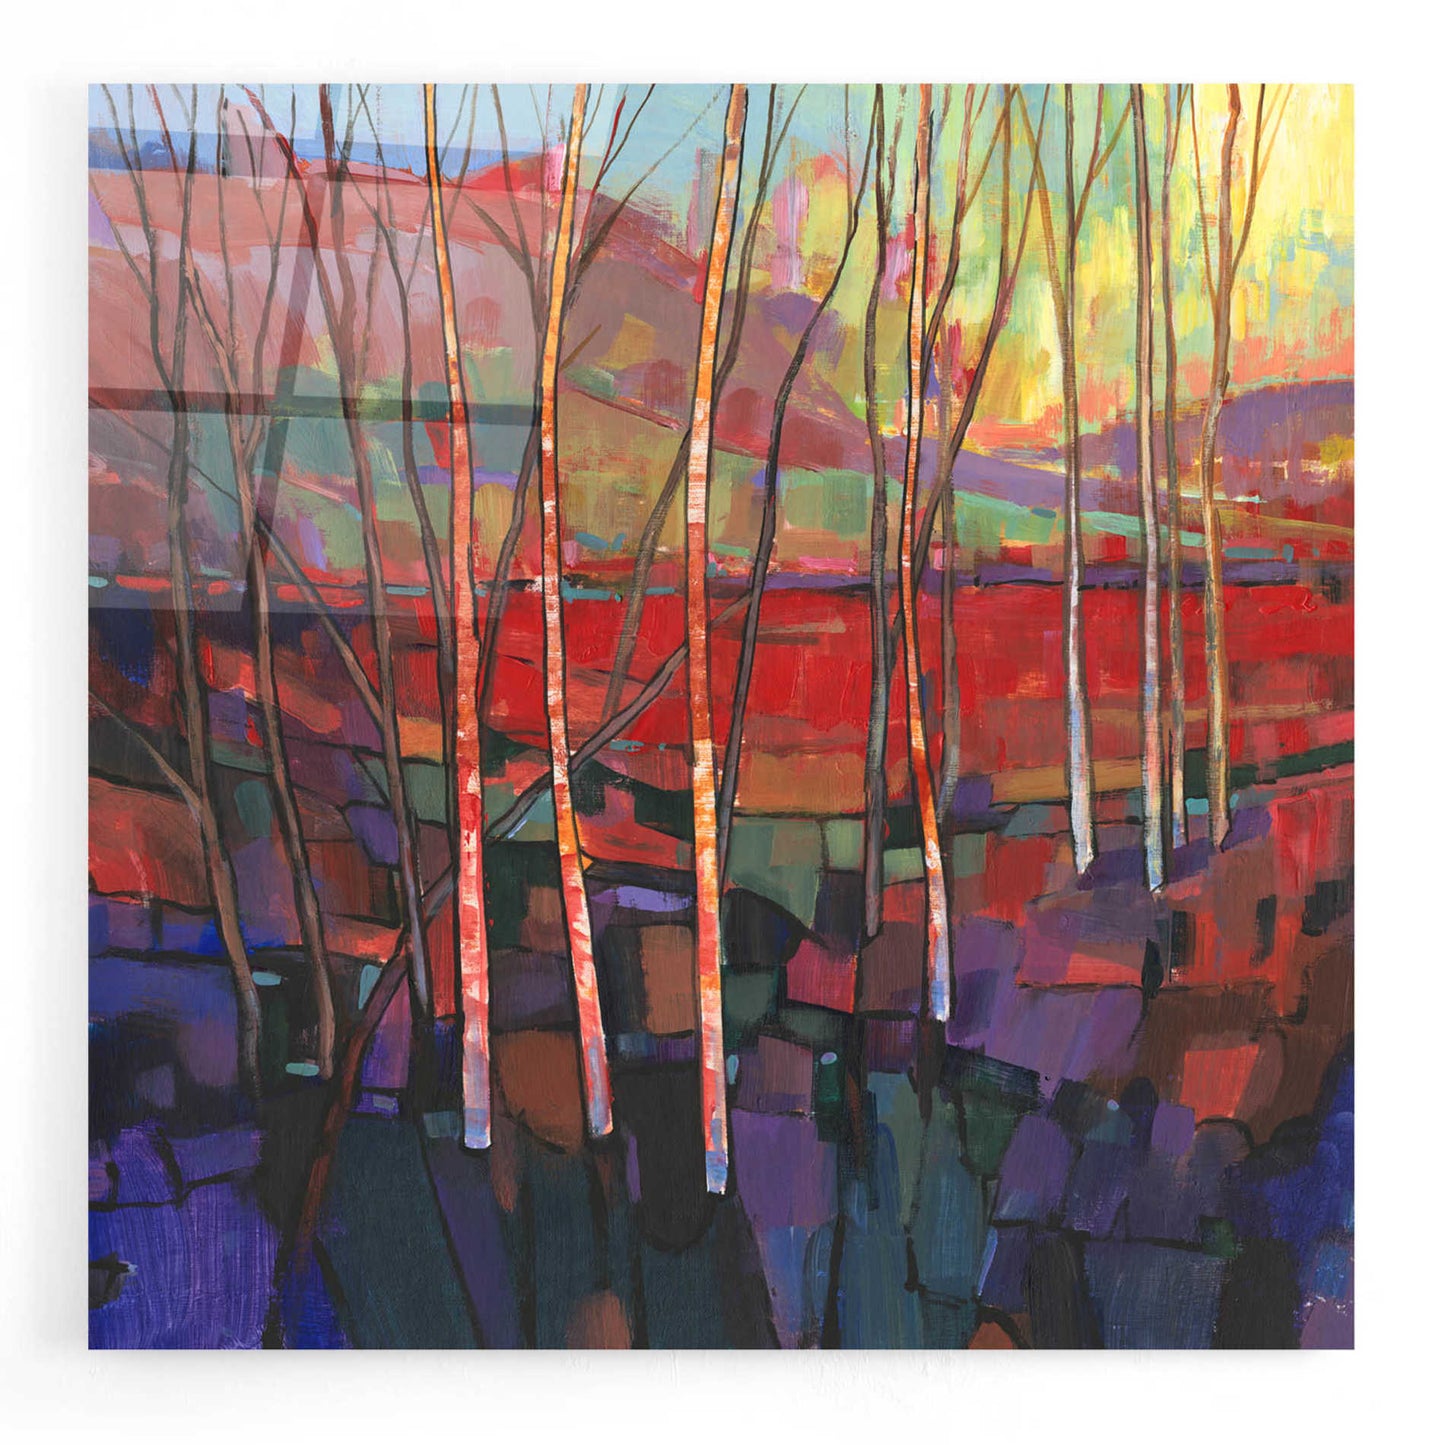 Epic Art 'Patchwork Trees II' by Tim O'Toole, Acrylic Glass Wall Art,24x24